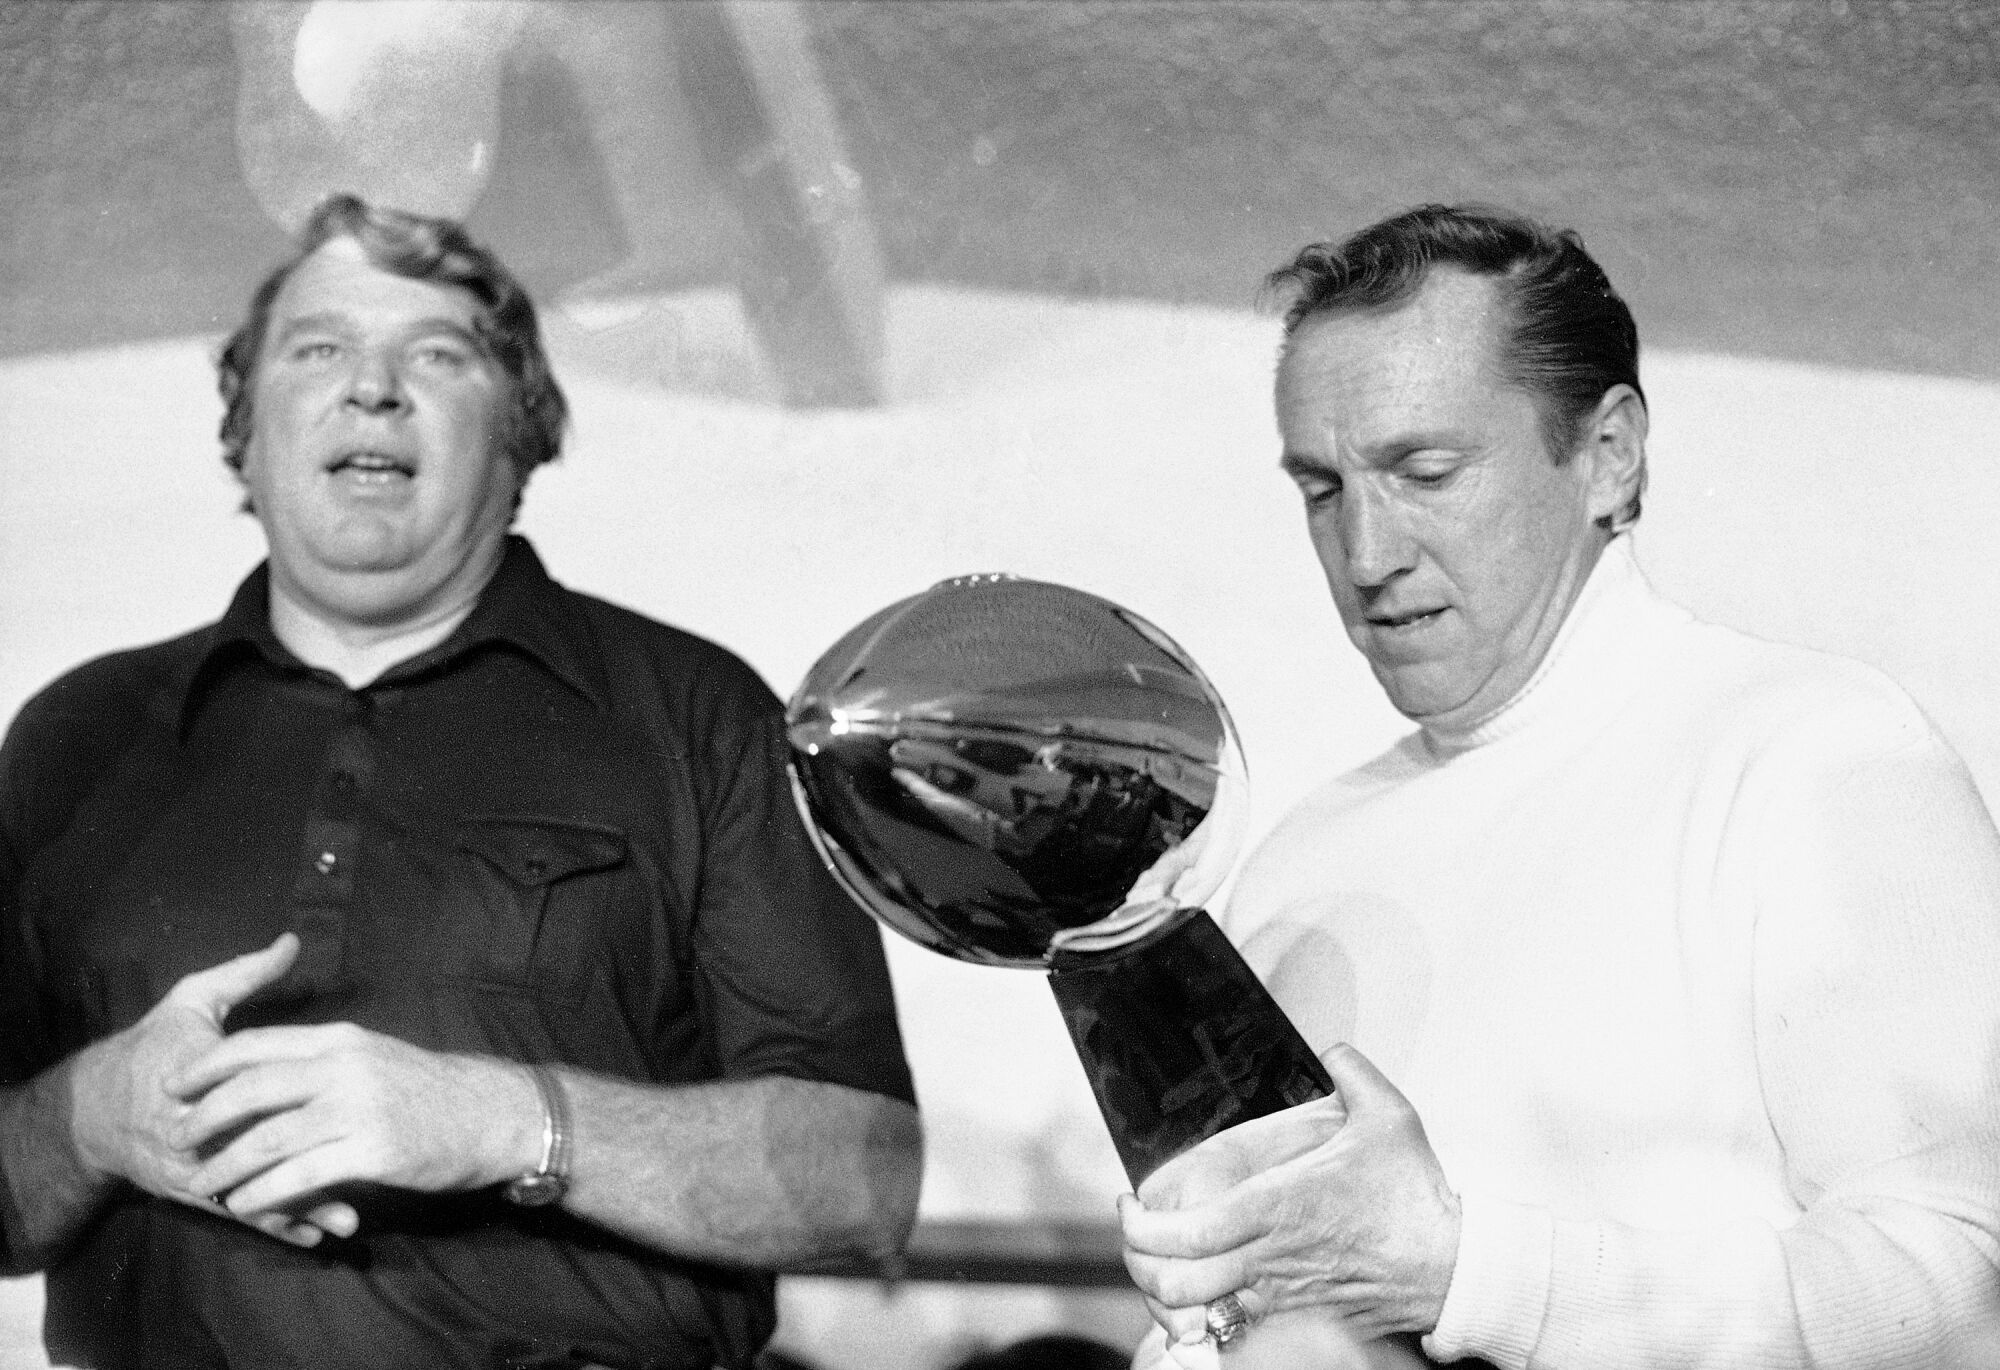 Oakland Raiders coach John Madden and team owner Al Davis speak to the media after winning the Super Bowl.